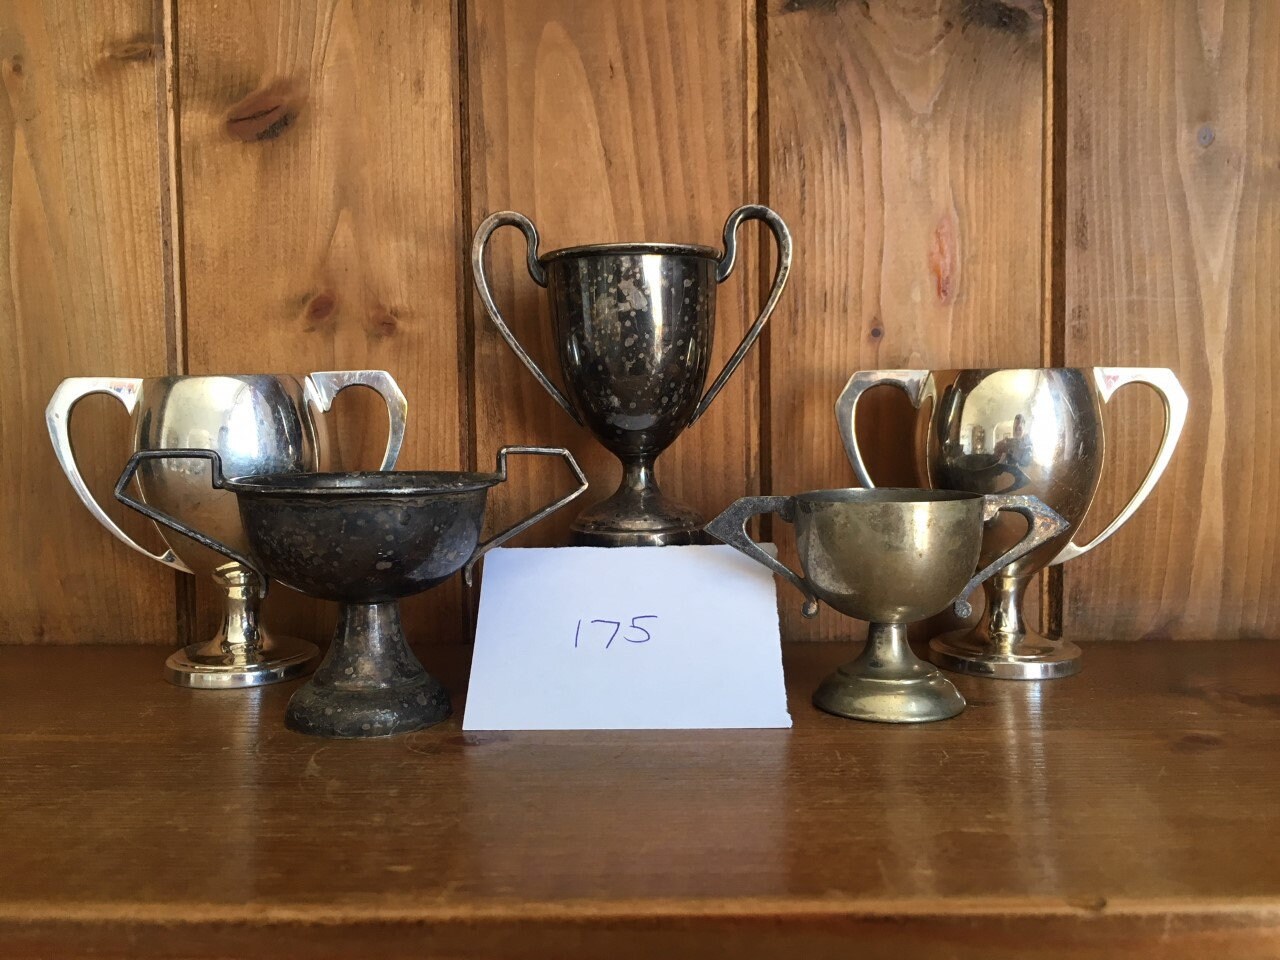 cups medals trophies trophy vintage collection of 5 silver plate sporting trophies NOT ENGRAVED sporting items sports